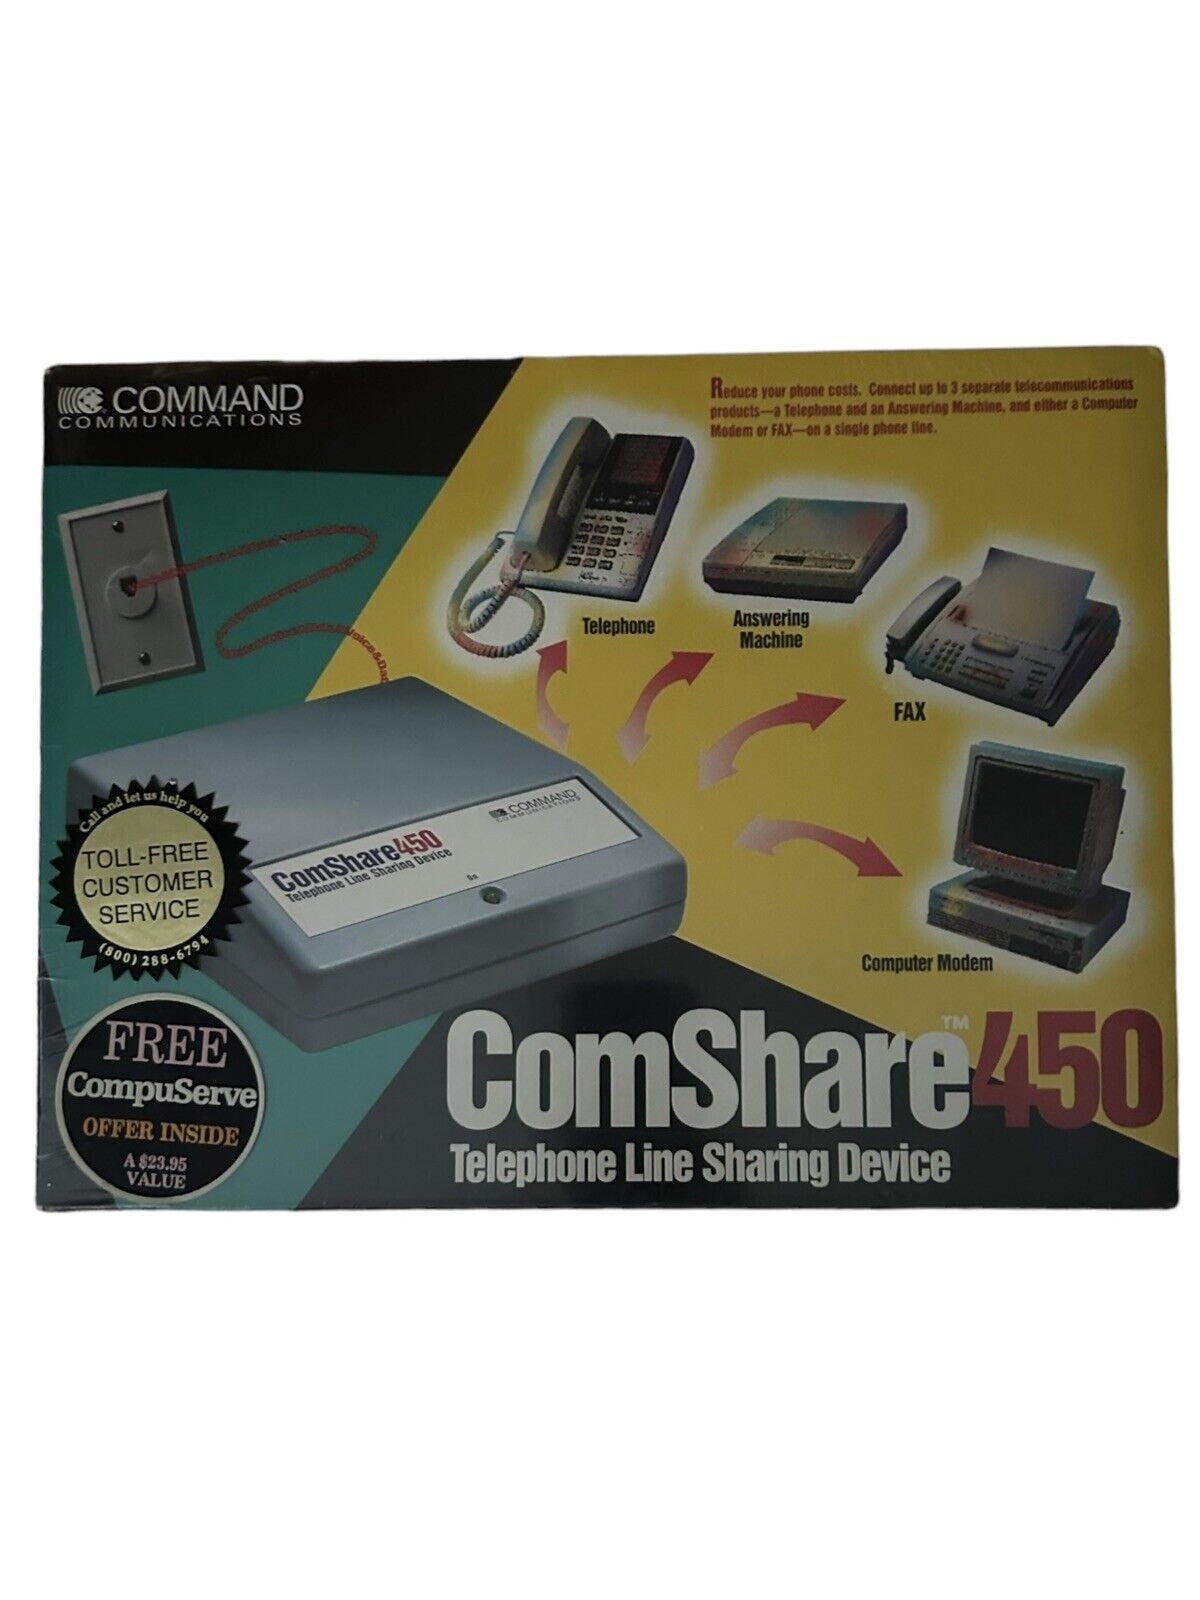 Vintage Comshare 450 Telephone Line Sharing Device Command Communications Sealed